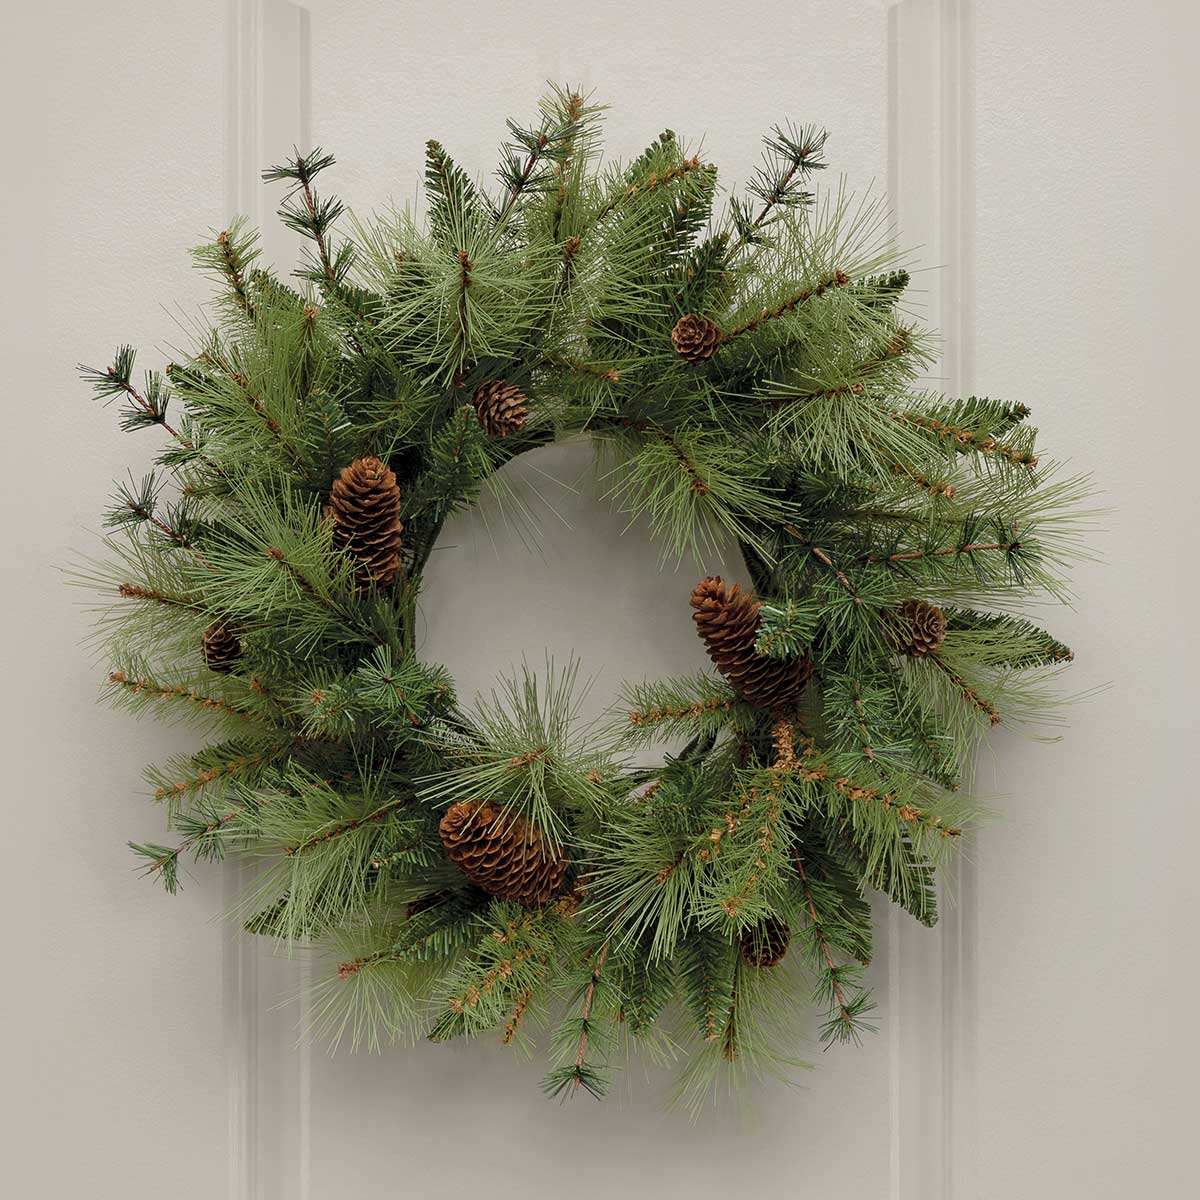 WREATH YELLOWSTONE PINE 18IN (INNER RING 7IN) - Click Image to Close